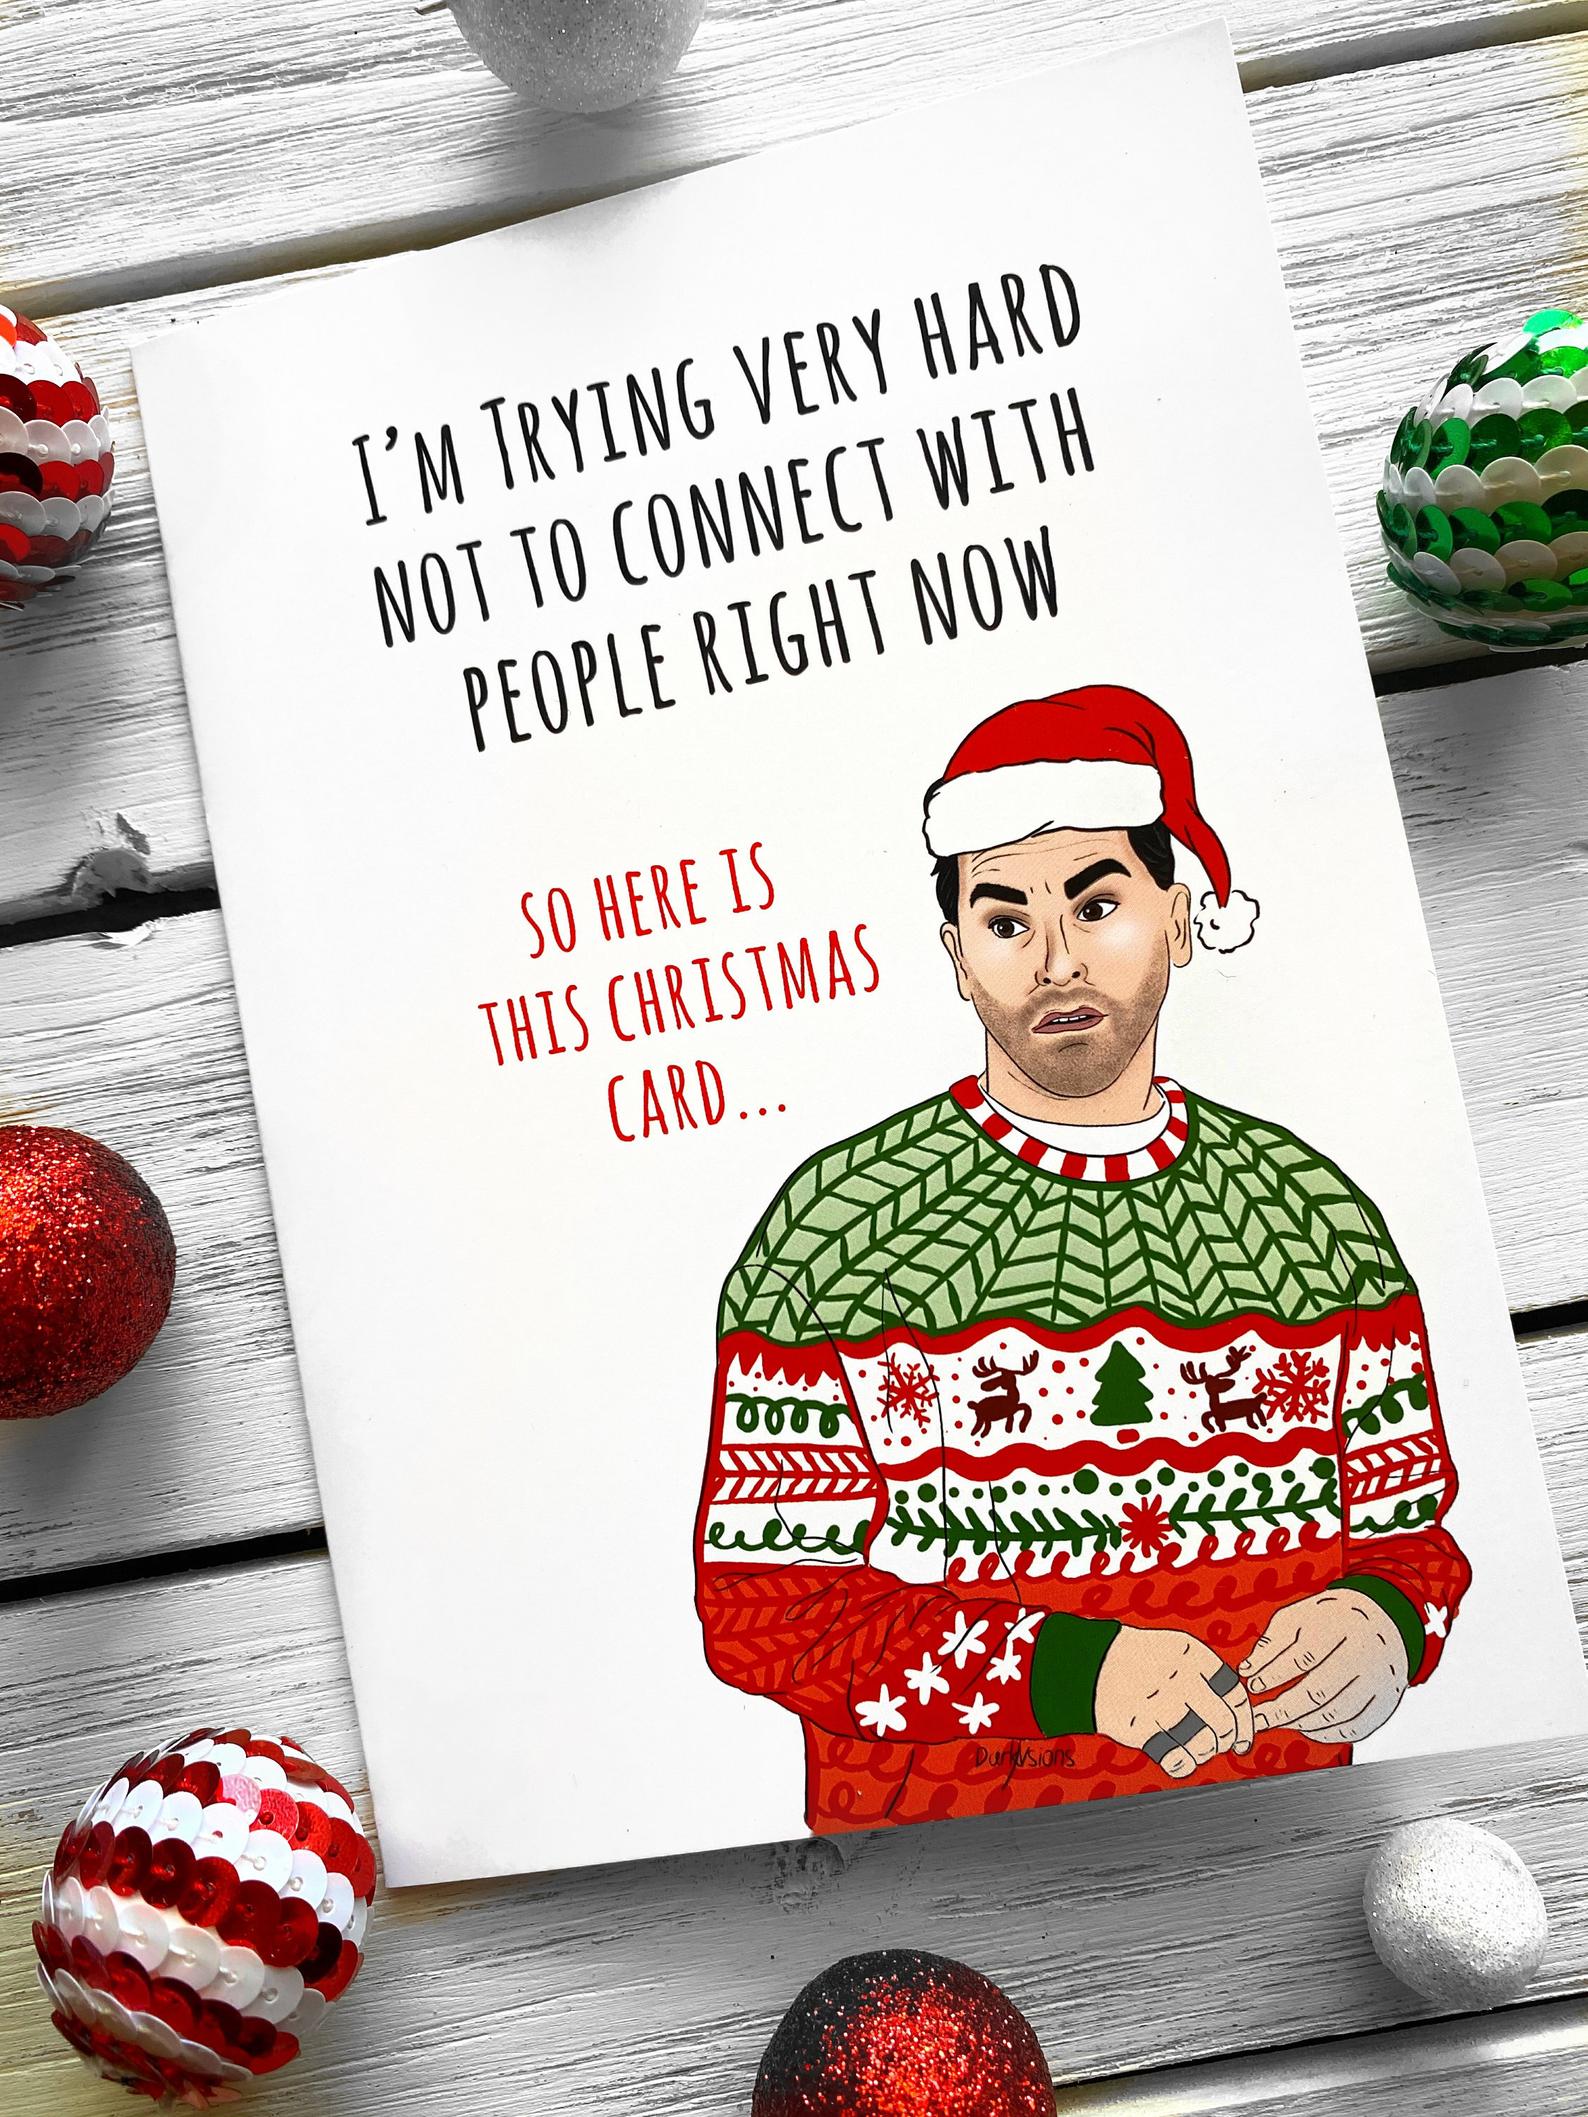 10 funny Christmas cards for 2020. Because we all need a laugh right now.